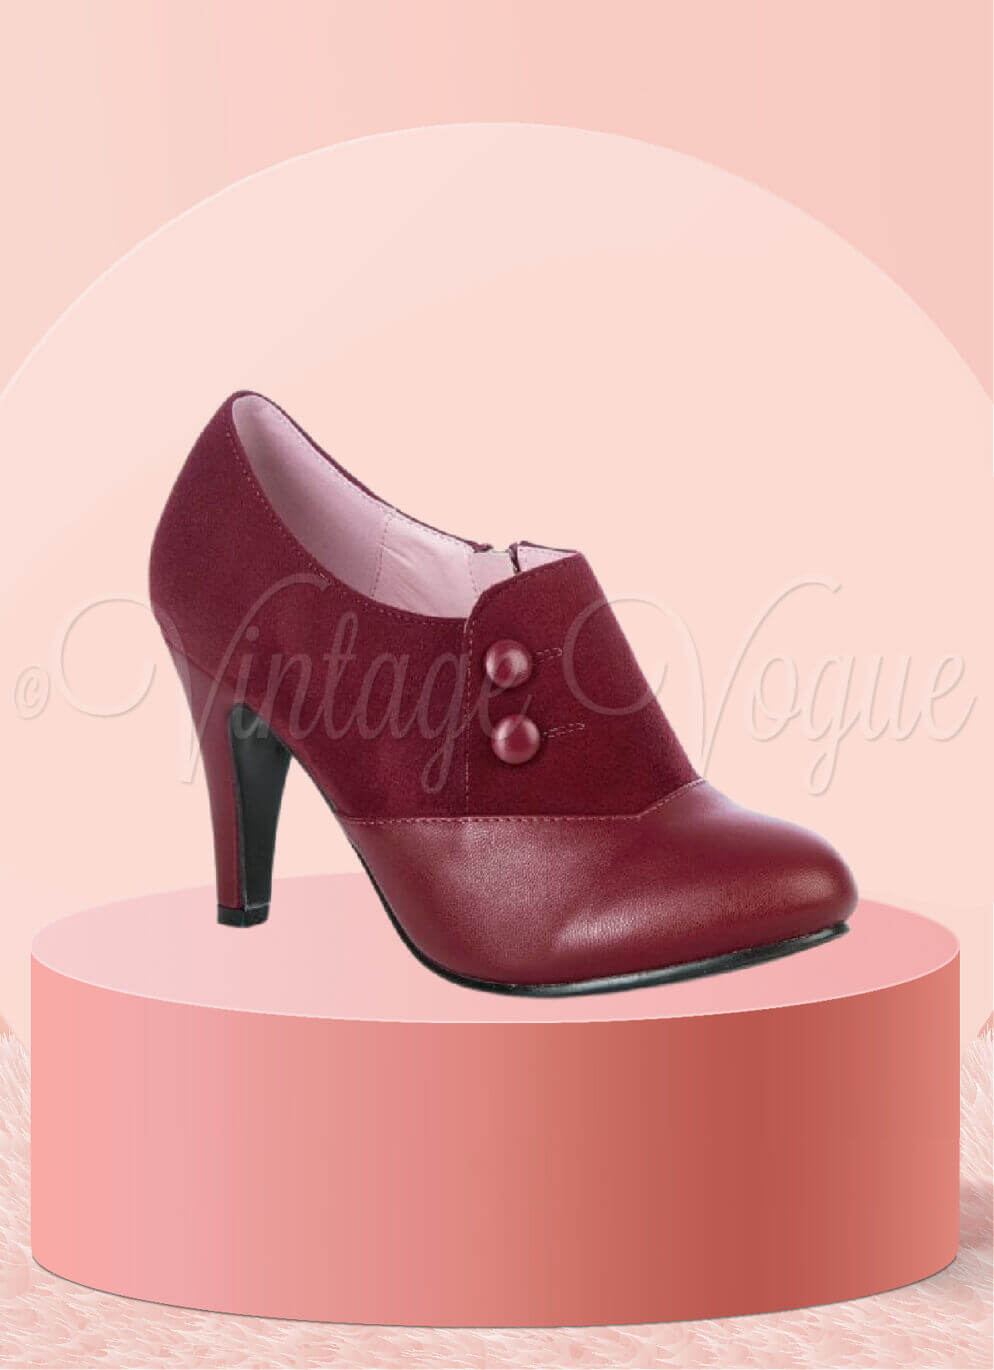 Lulu Hun 50er Jahre Retro Vintage Ankle Boots Pumps Maria in Weinrot